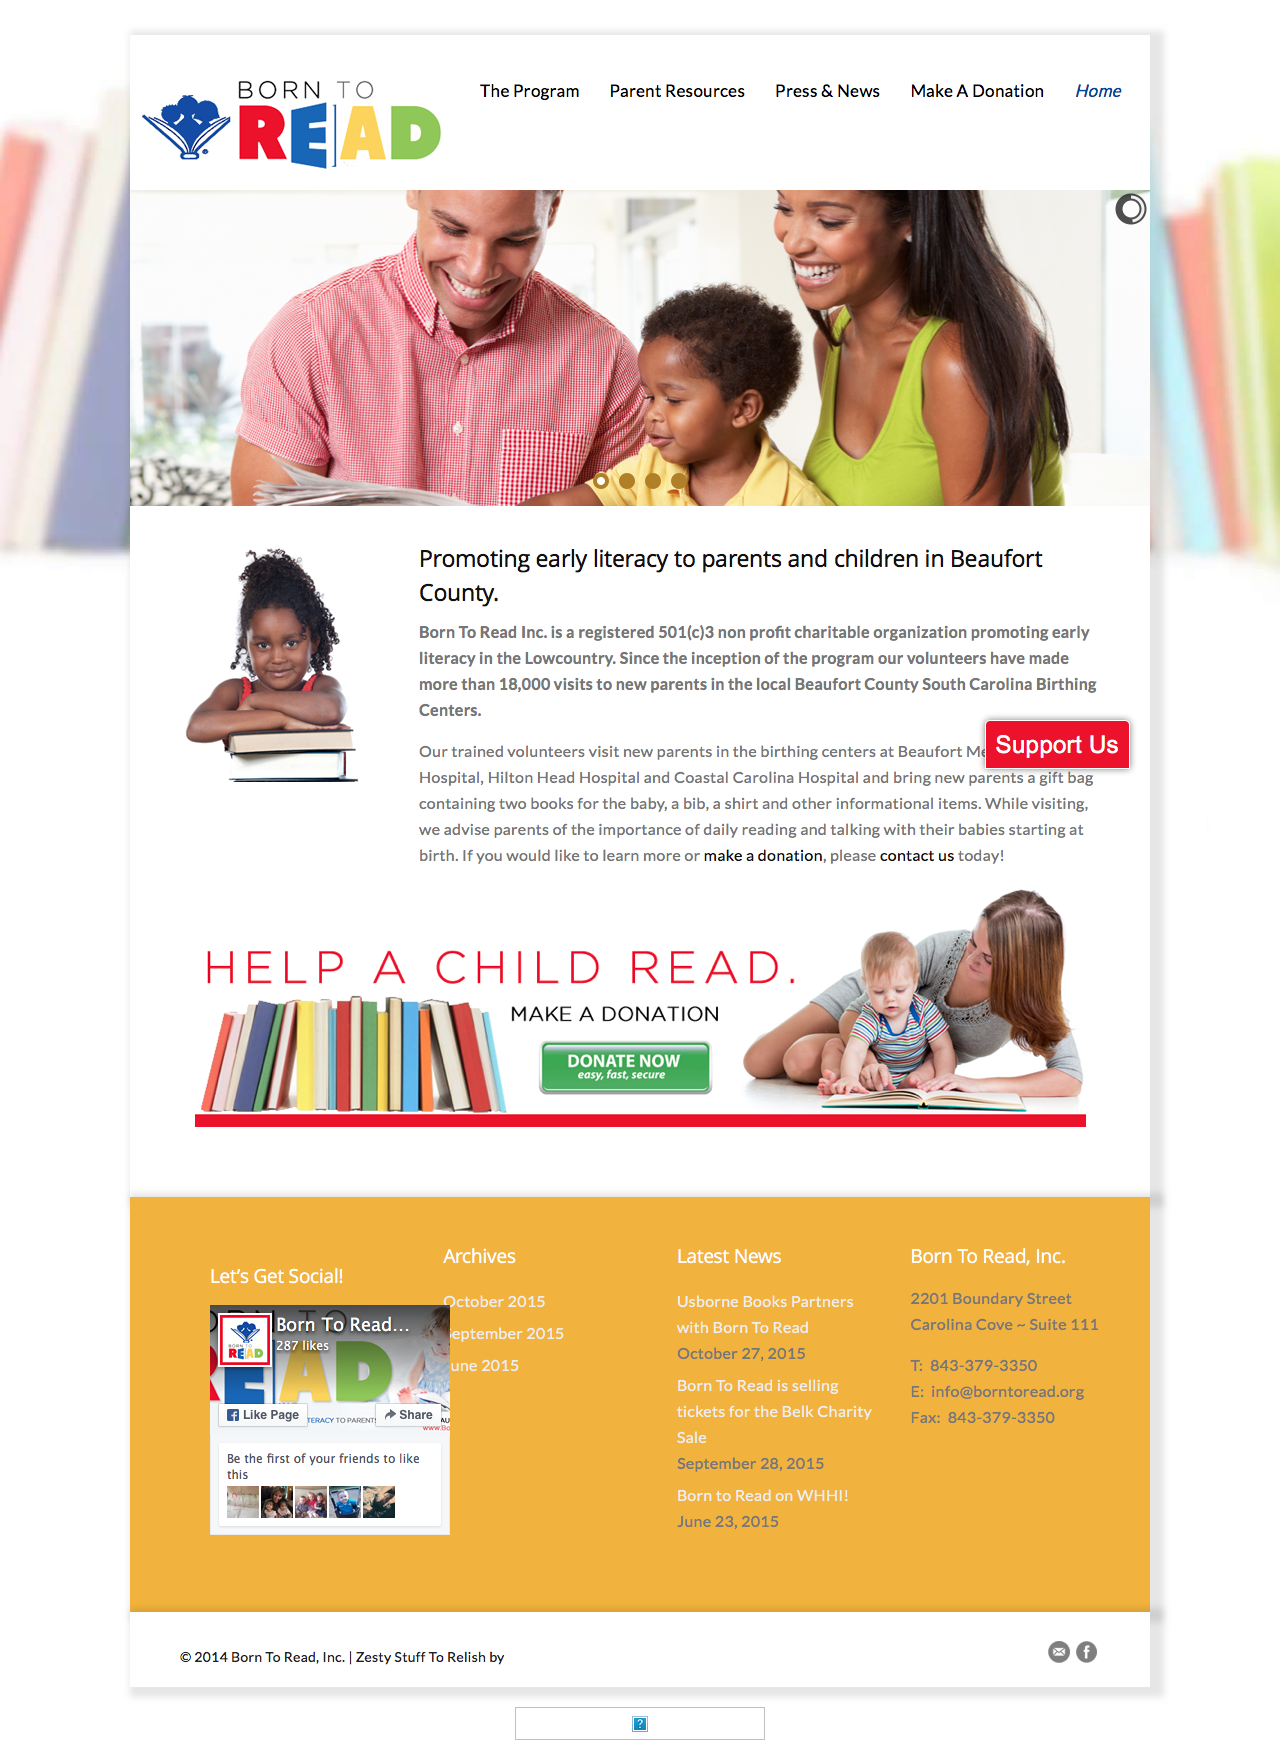 Beaufort Website Design |Born To Read : Promoting early literacy to parents and children in Beaufort County. | Born To Read Inc. is a registered 501(c)3 non profit charitable organization promoting early literacy.